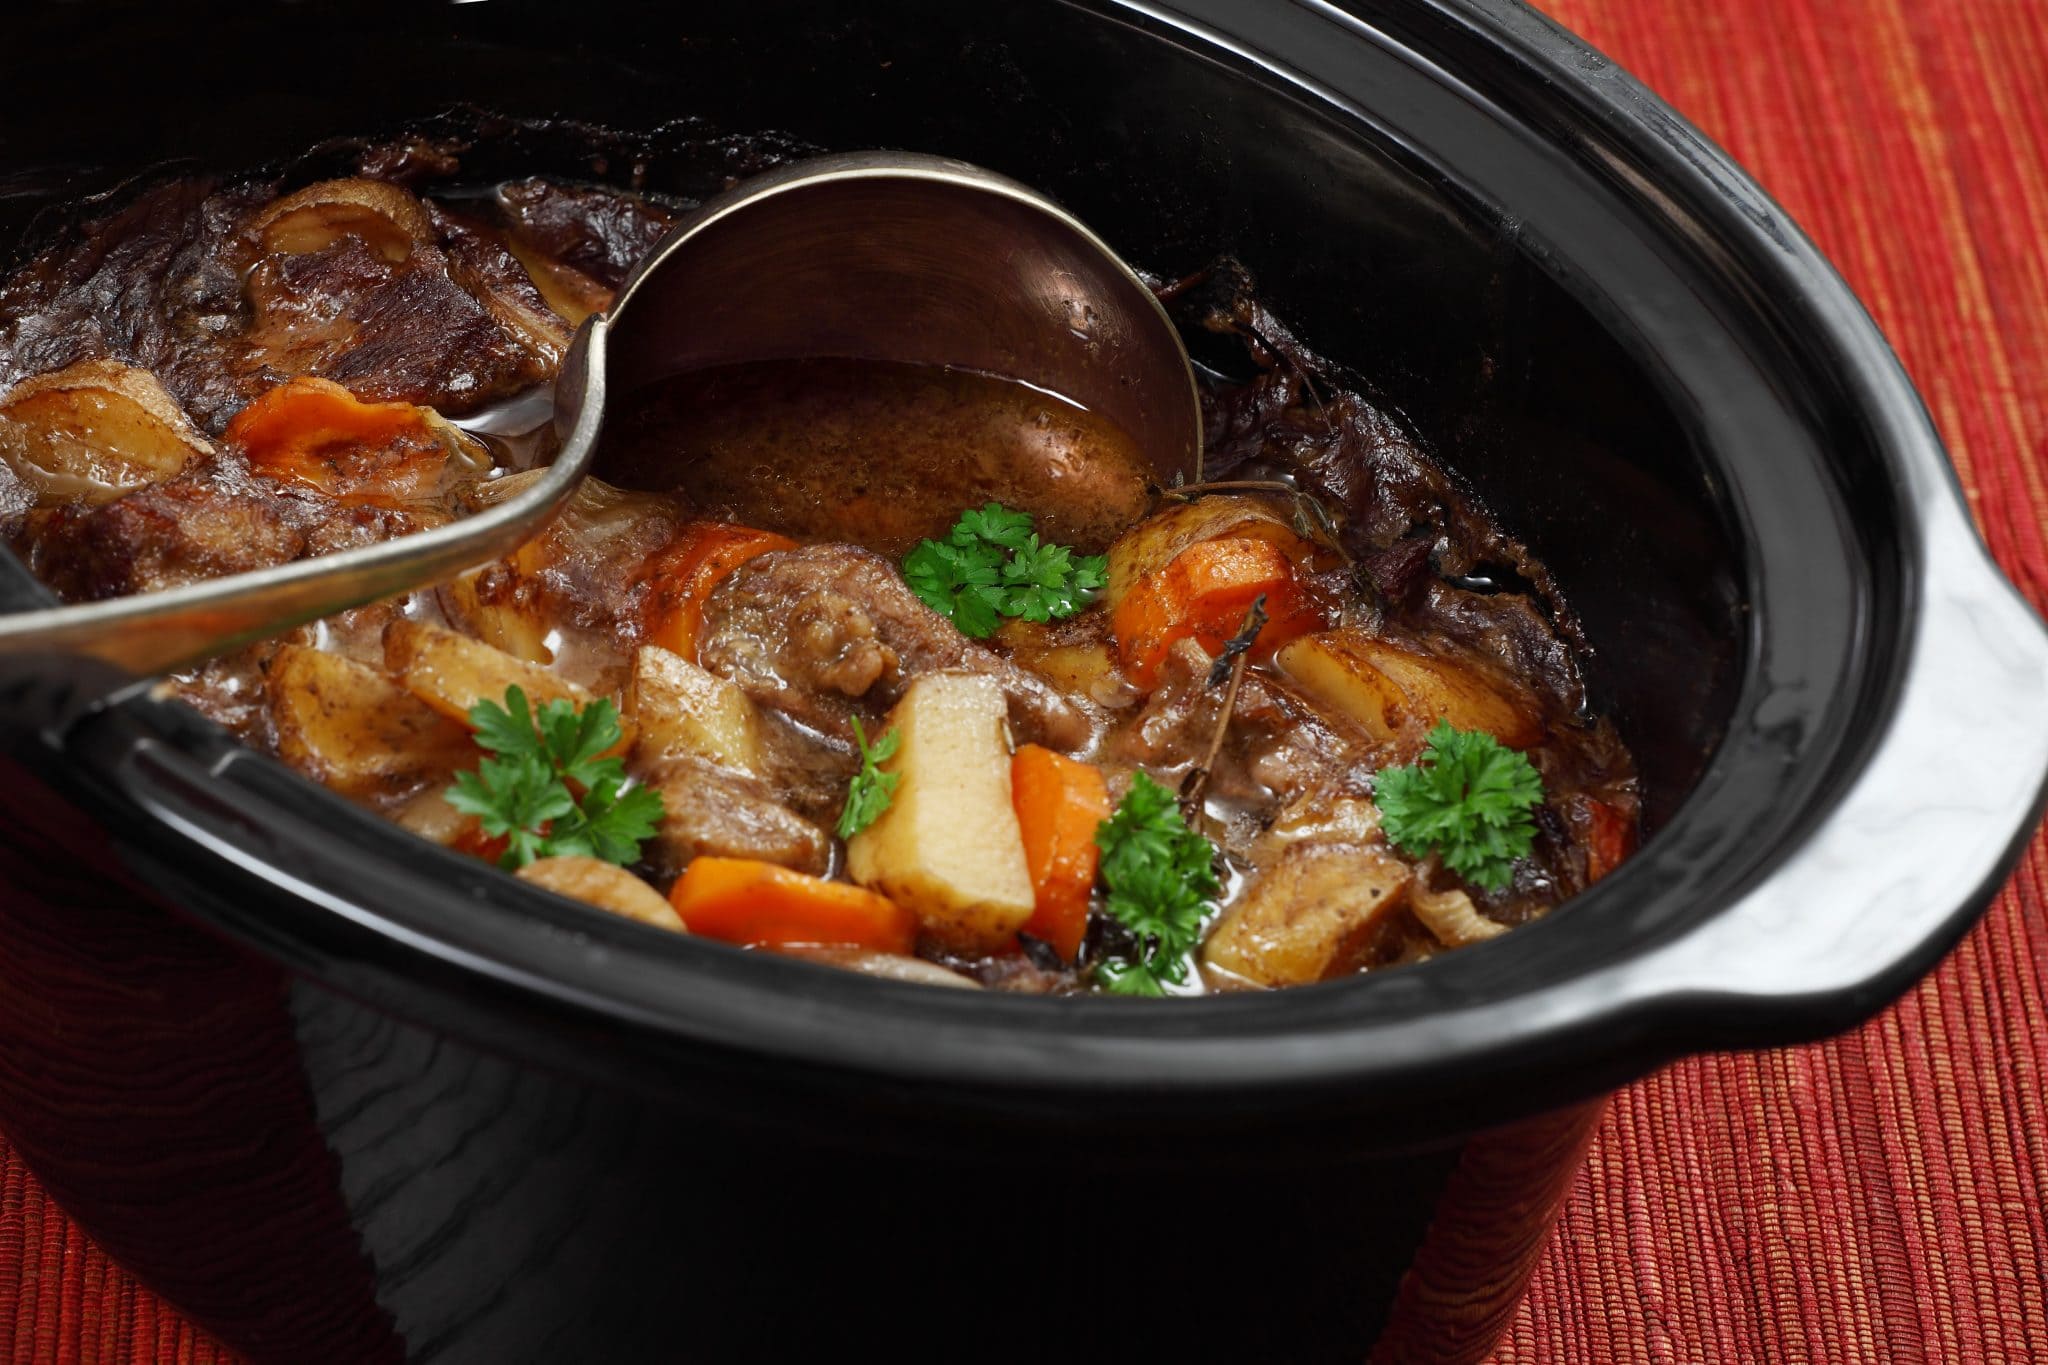 Homemade beef stew inside of a Crock Pot with a large ladle digging in